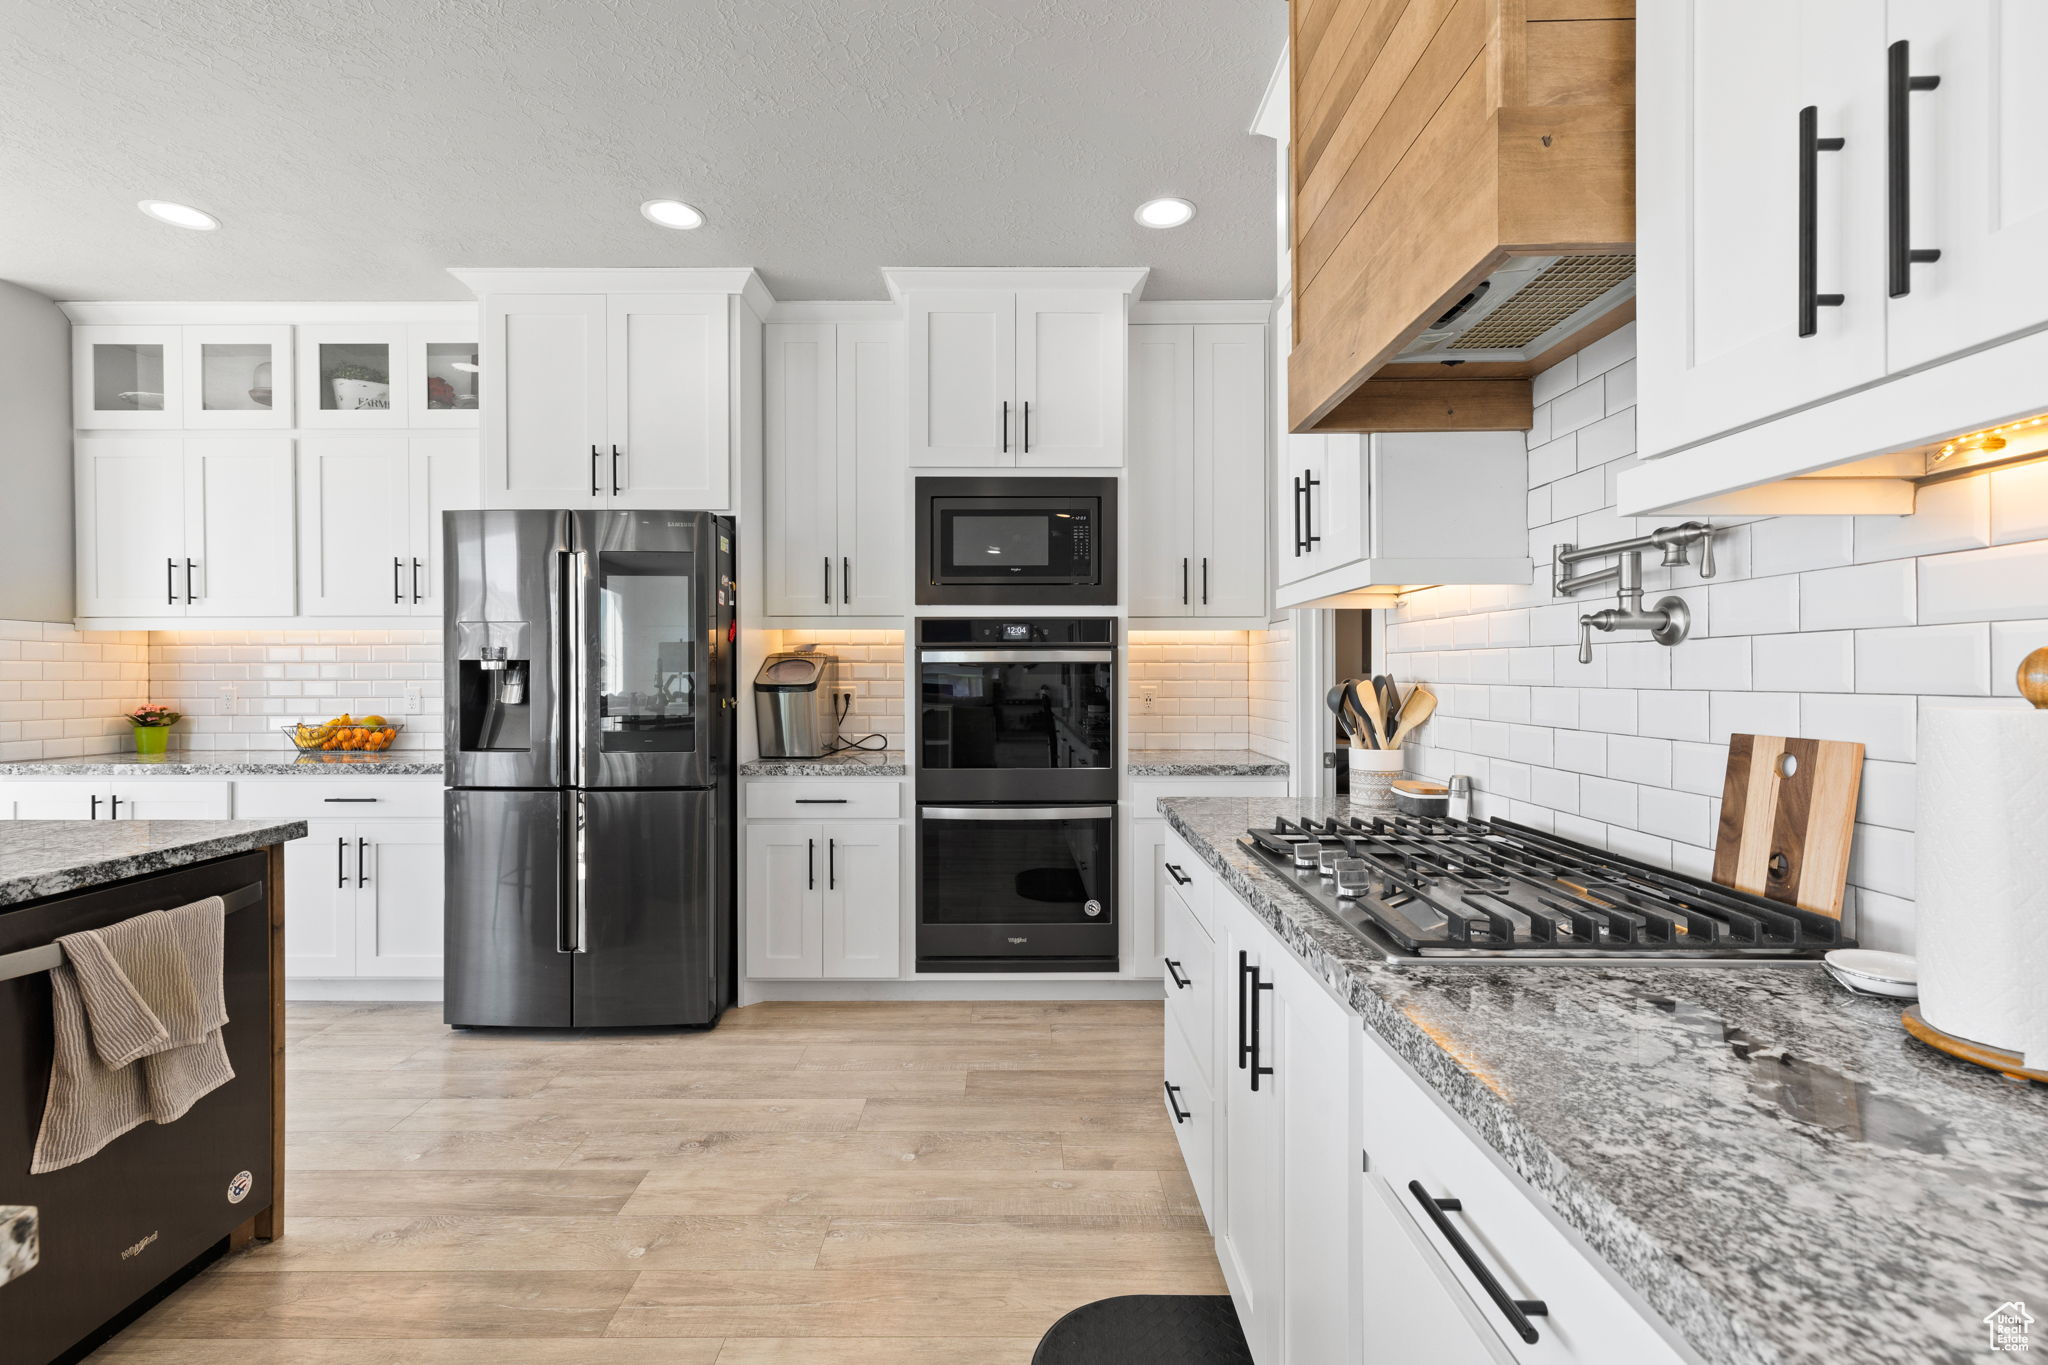 Kitchen featuring backsplash, appliances with stainless steel finishes, custom exhaust hood, and white cabinets